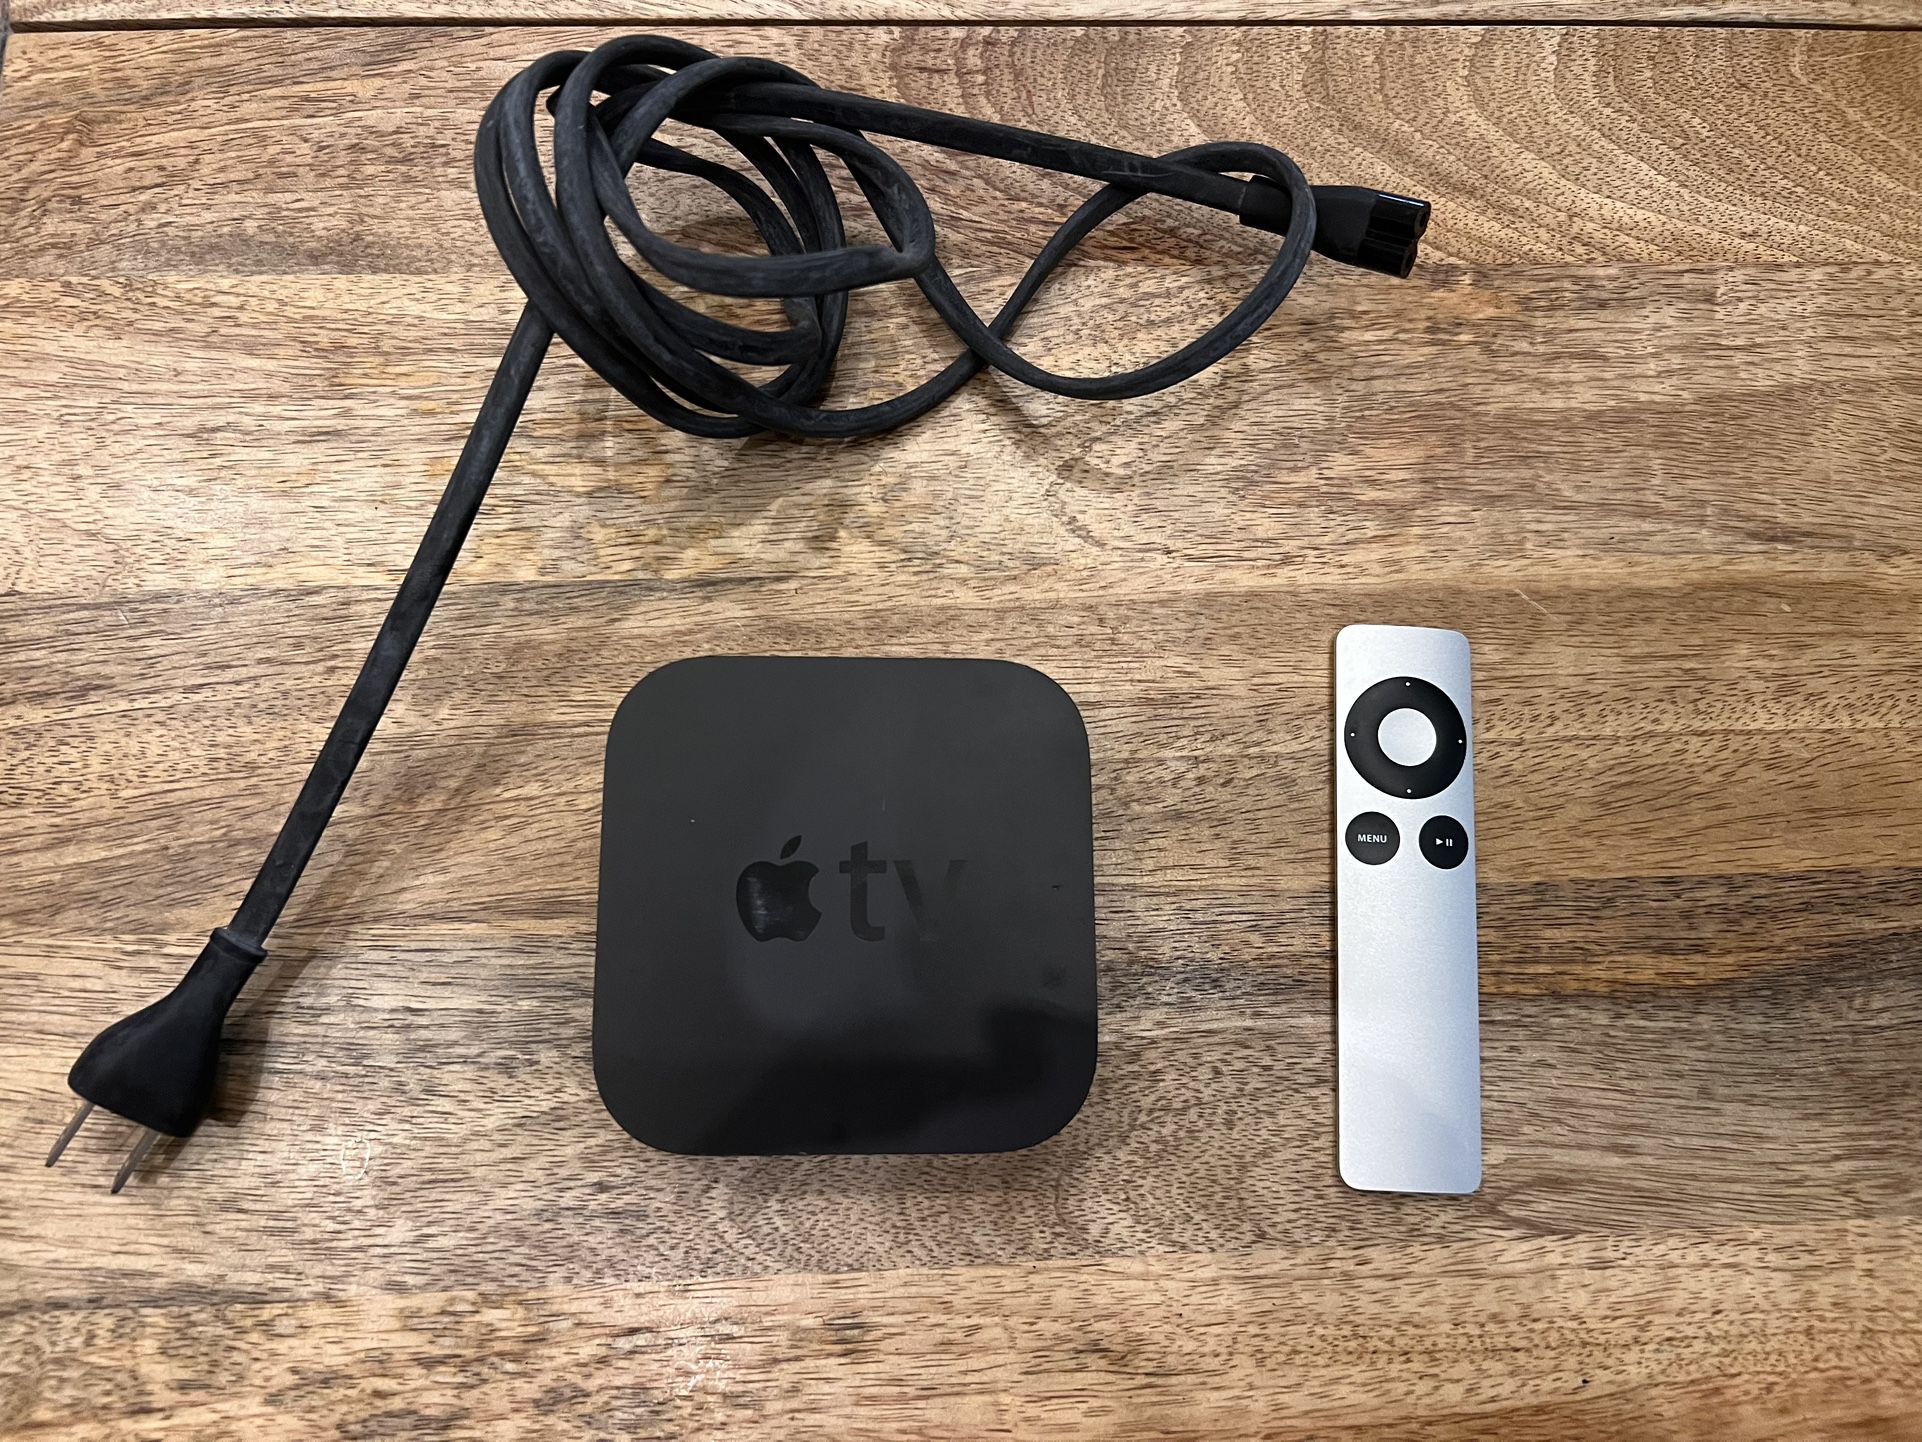 Apple TV Model A1469 3rd Generation with REMOTE & Power Cable